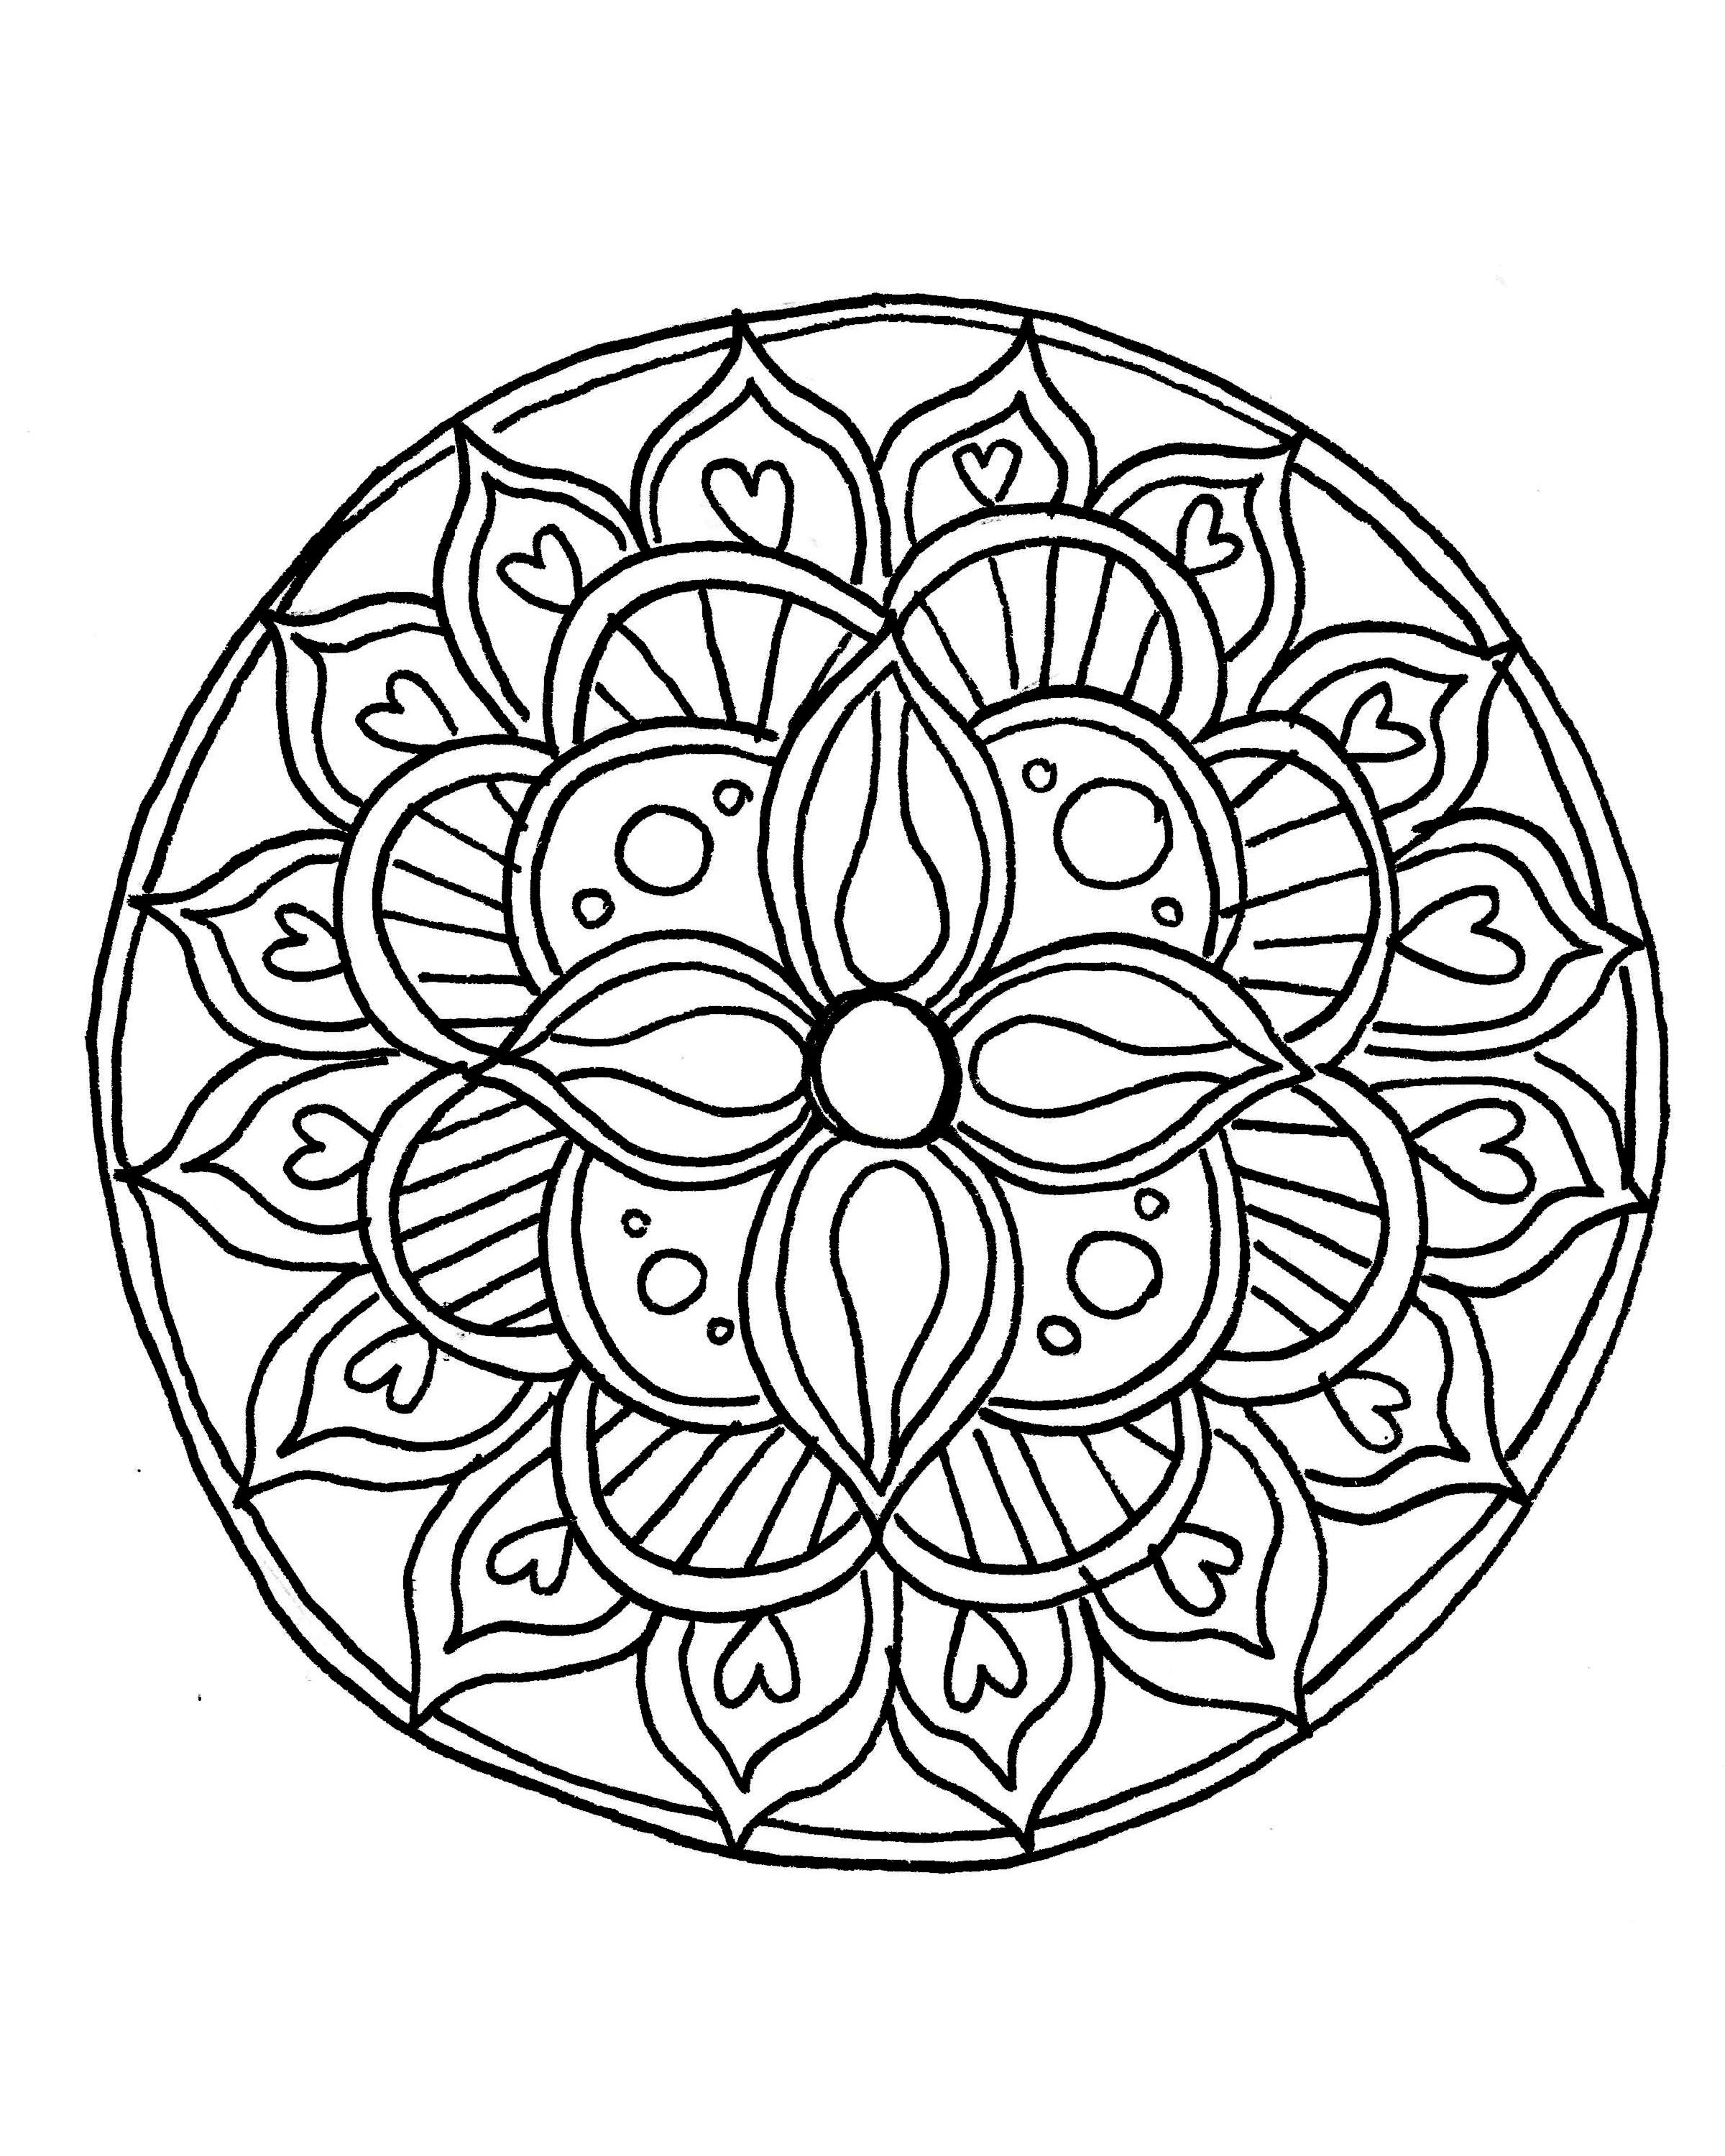 How To Draw A Mandala (With Free Coloring Pages!) | Drawings - Free Printable Mandala Patterns